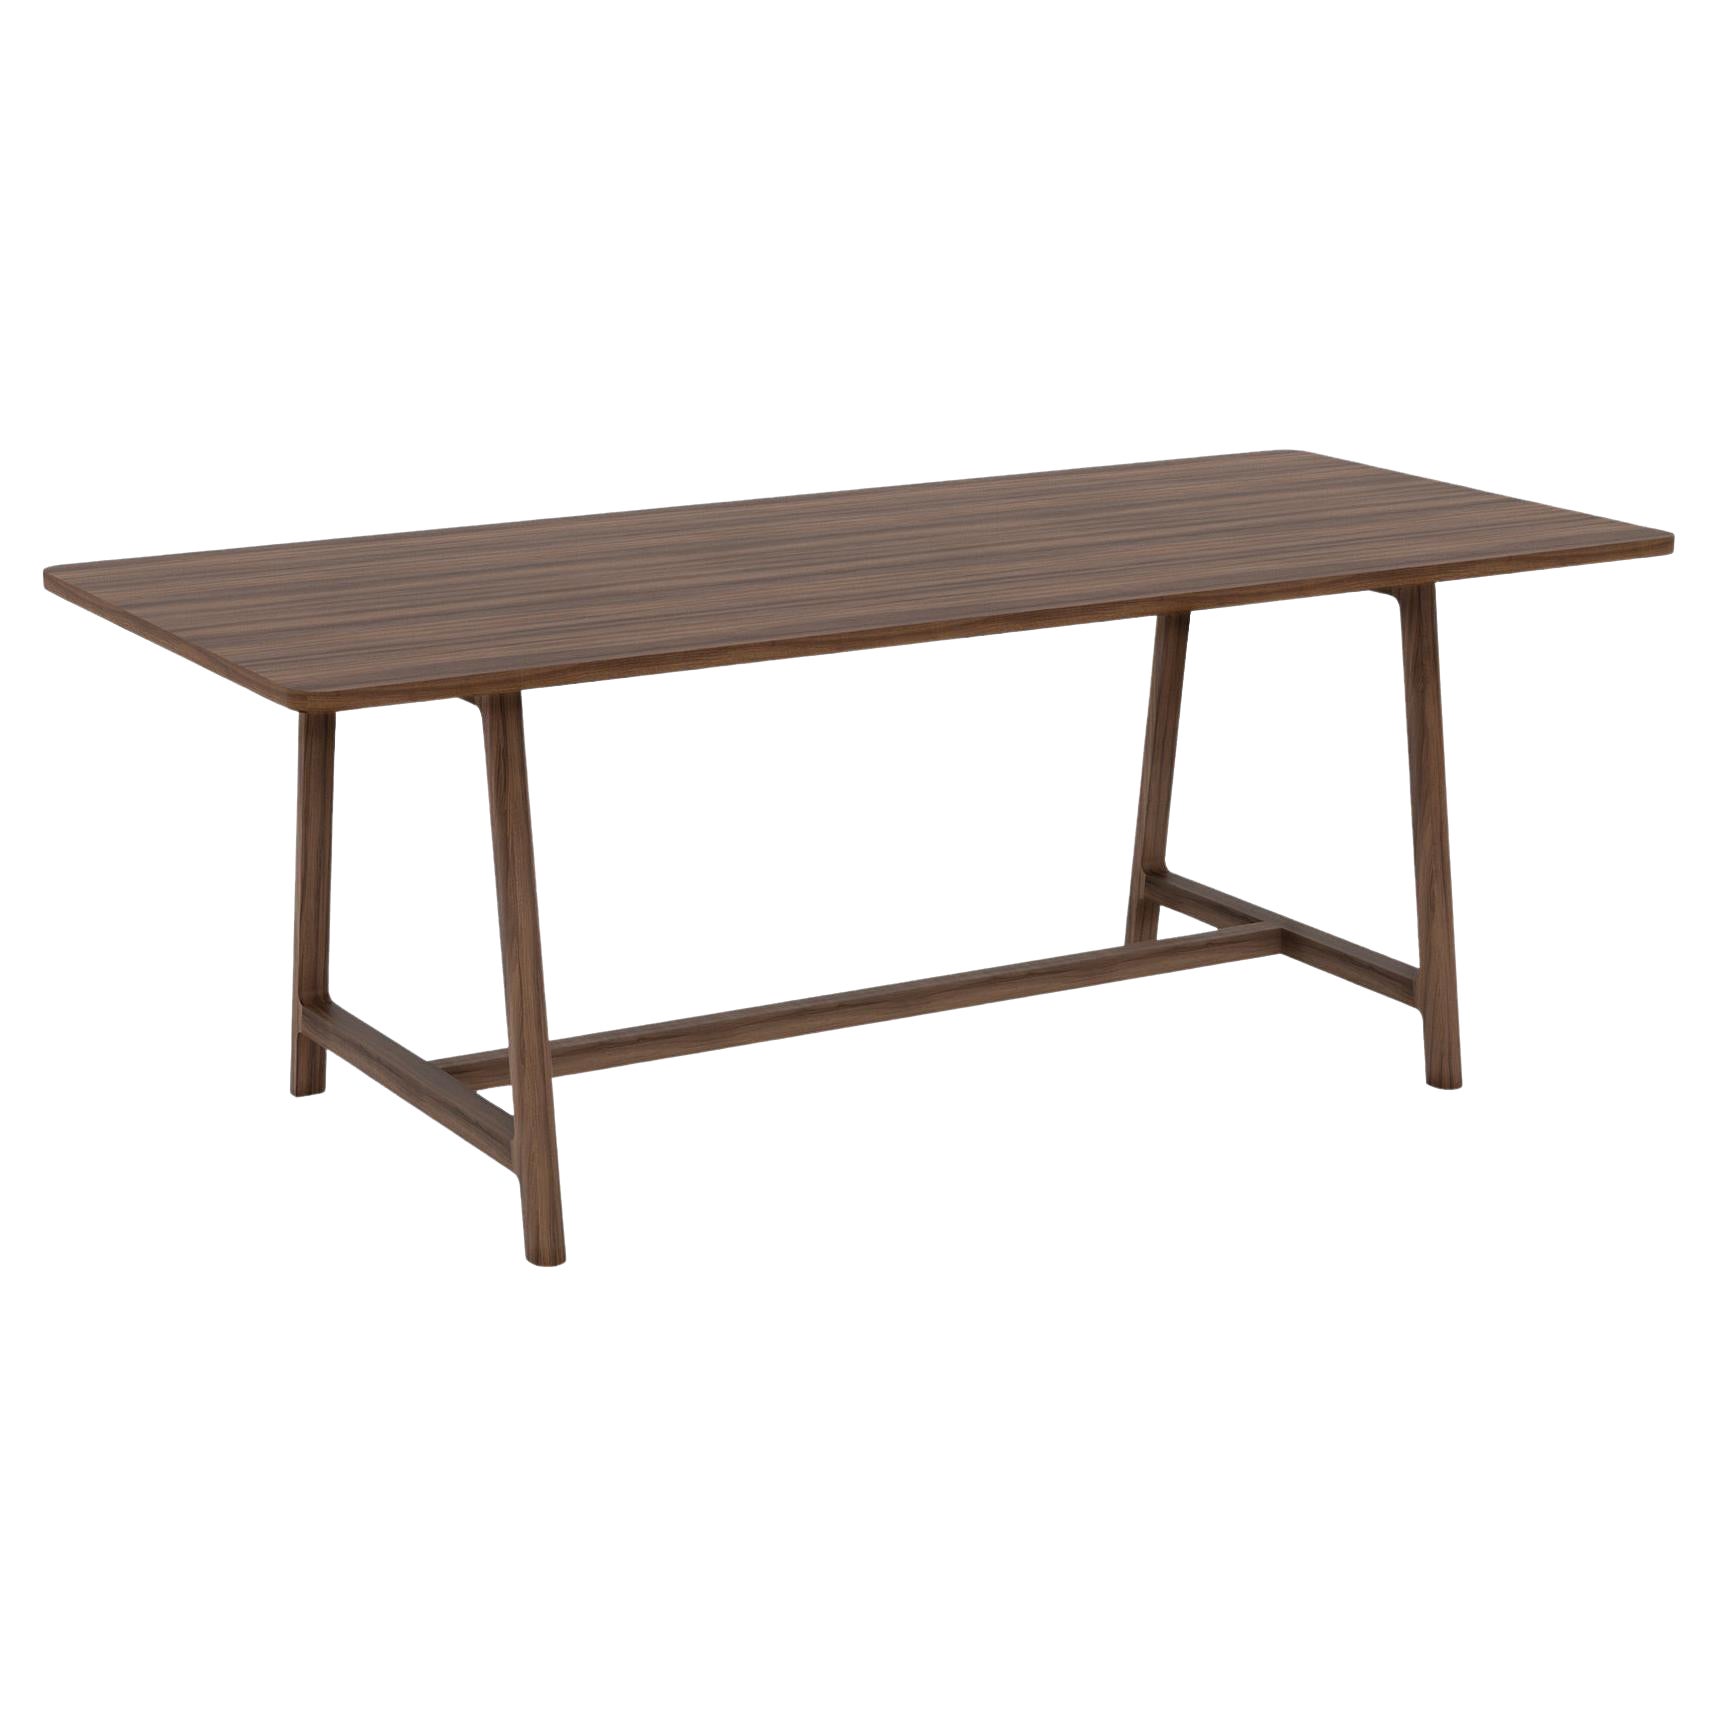 Minimalist Modern Table in Walnut Wood Frame Collection For Sale